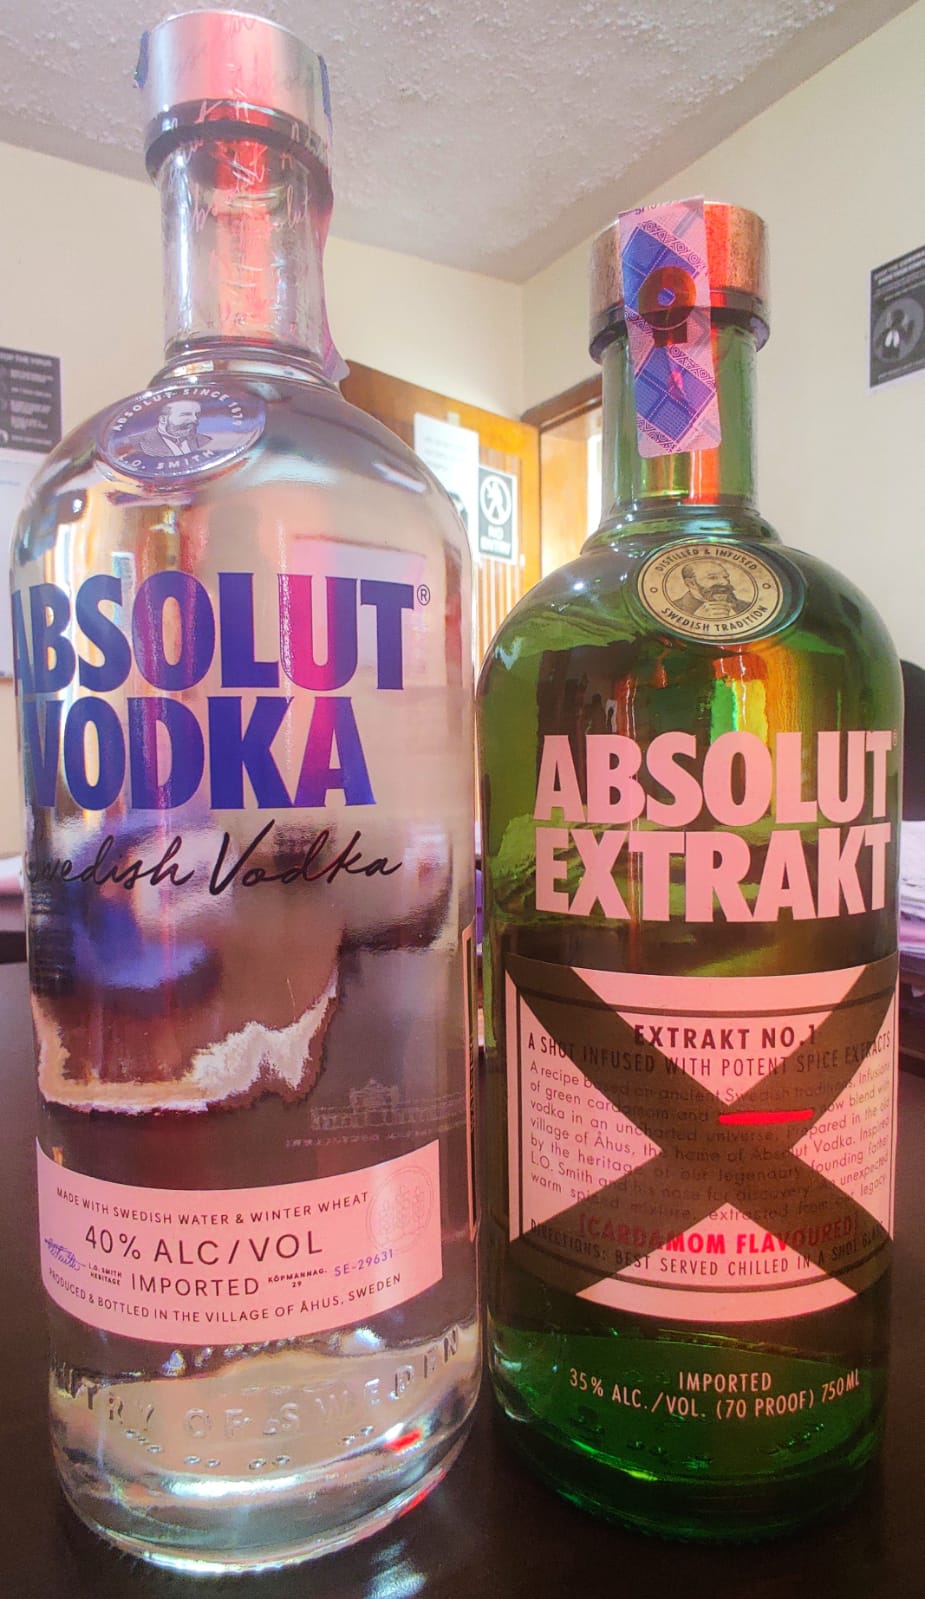 Absolute Vodka 1Ltr + Absolute Extract 75Cl Pack